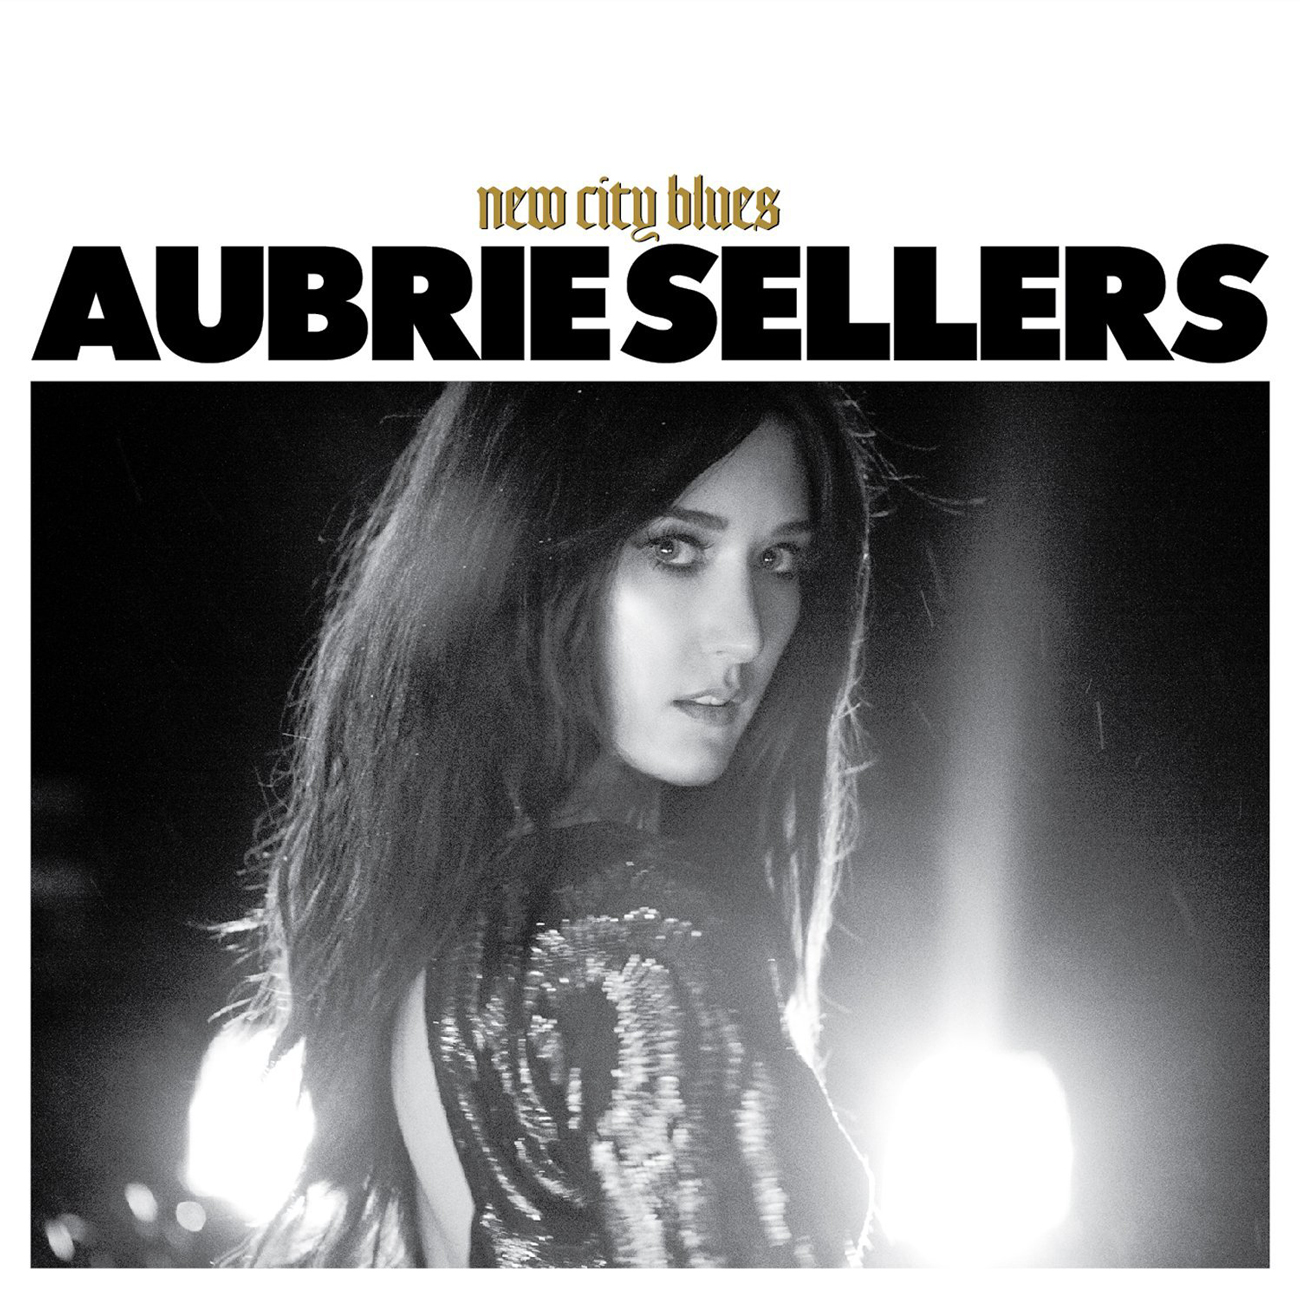 Aubrie Sellers, New City Blues cover art. Photo provided.